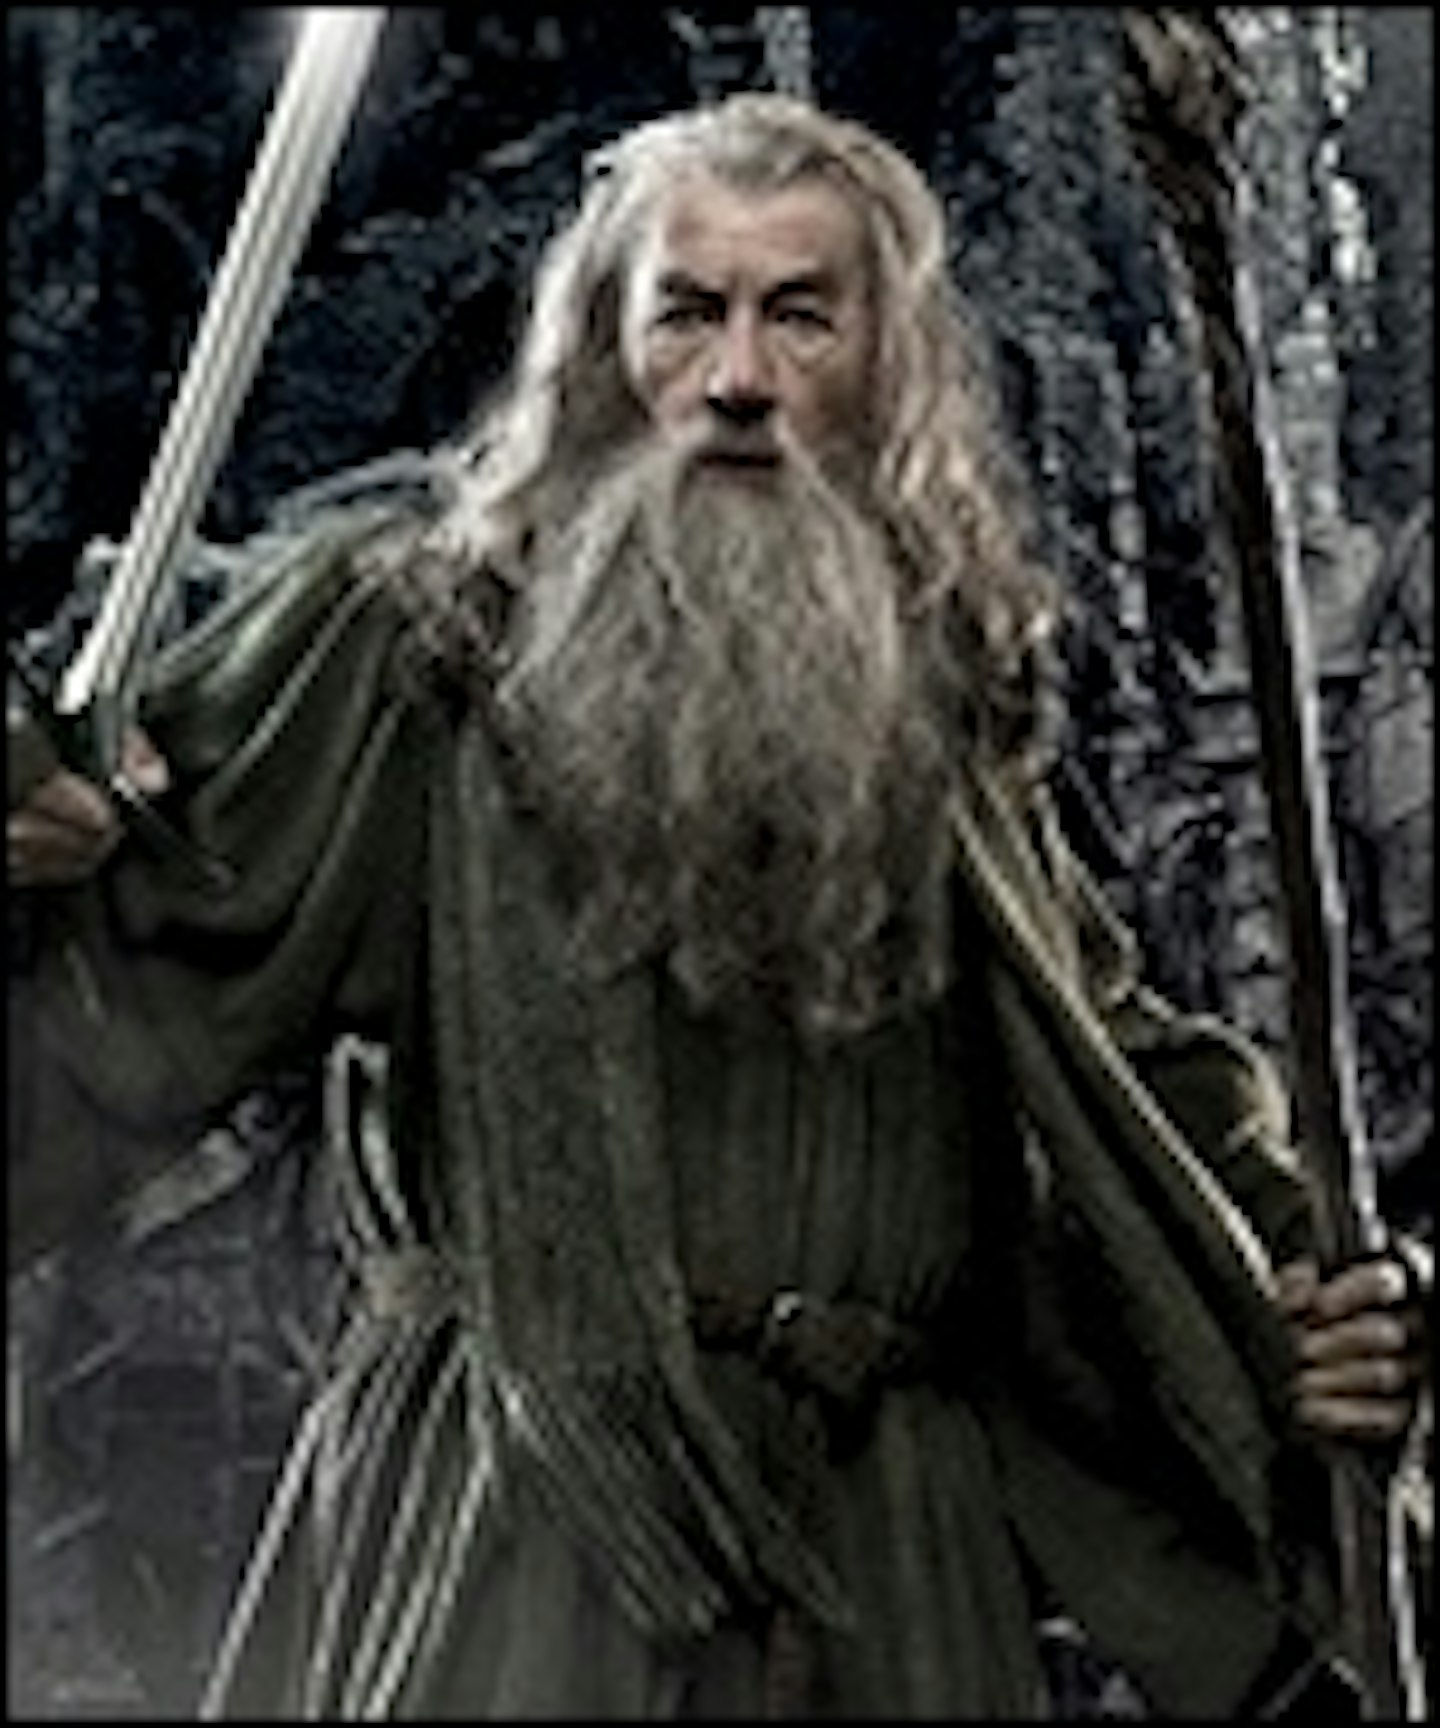 New Banner For The Hobbit: The Desolation Of Smaug